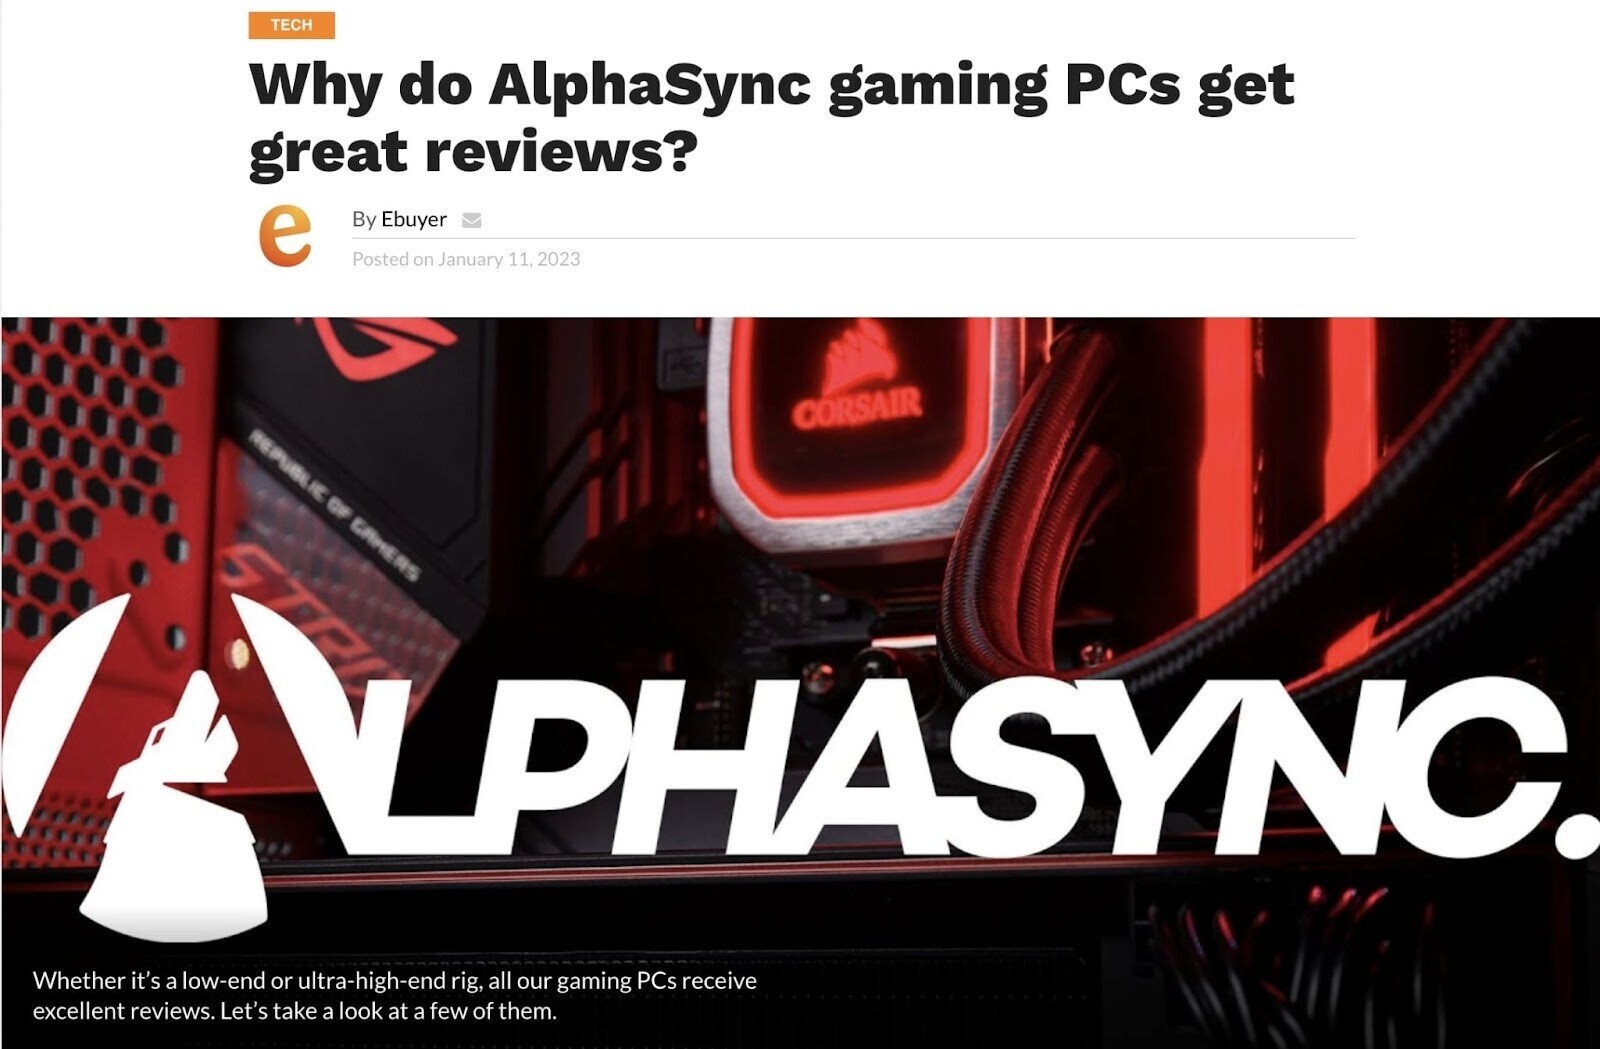 A blog on "Why do AlphaSync gaming PCs get great reviews?"